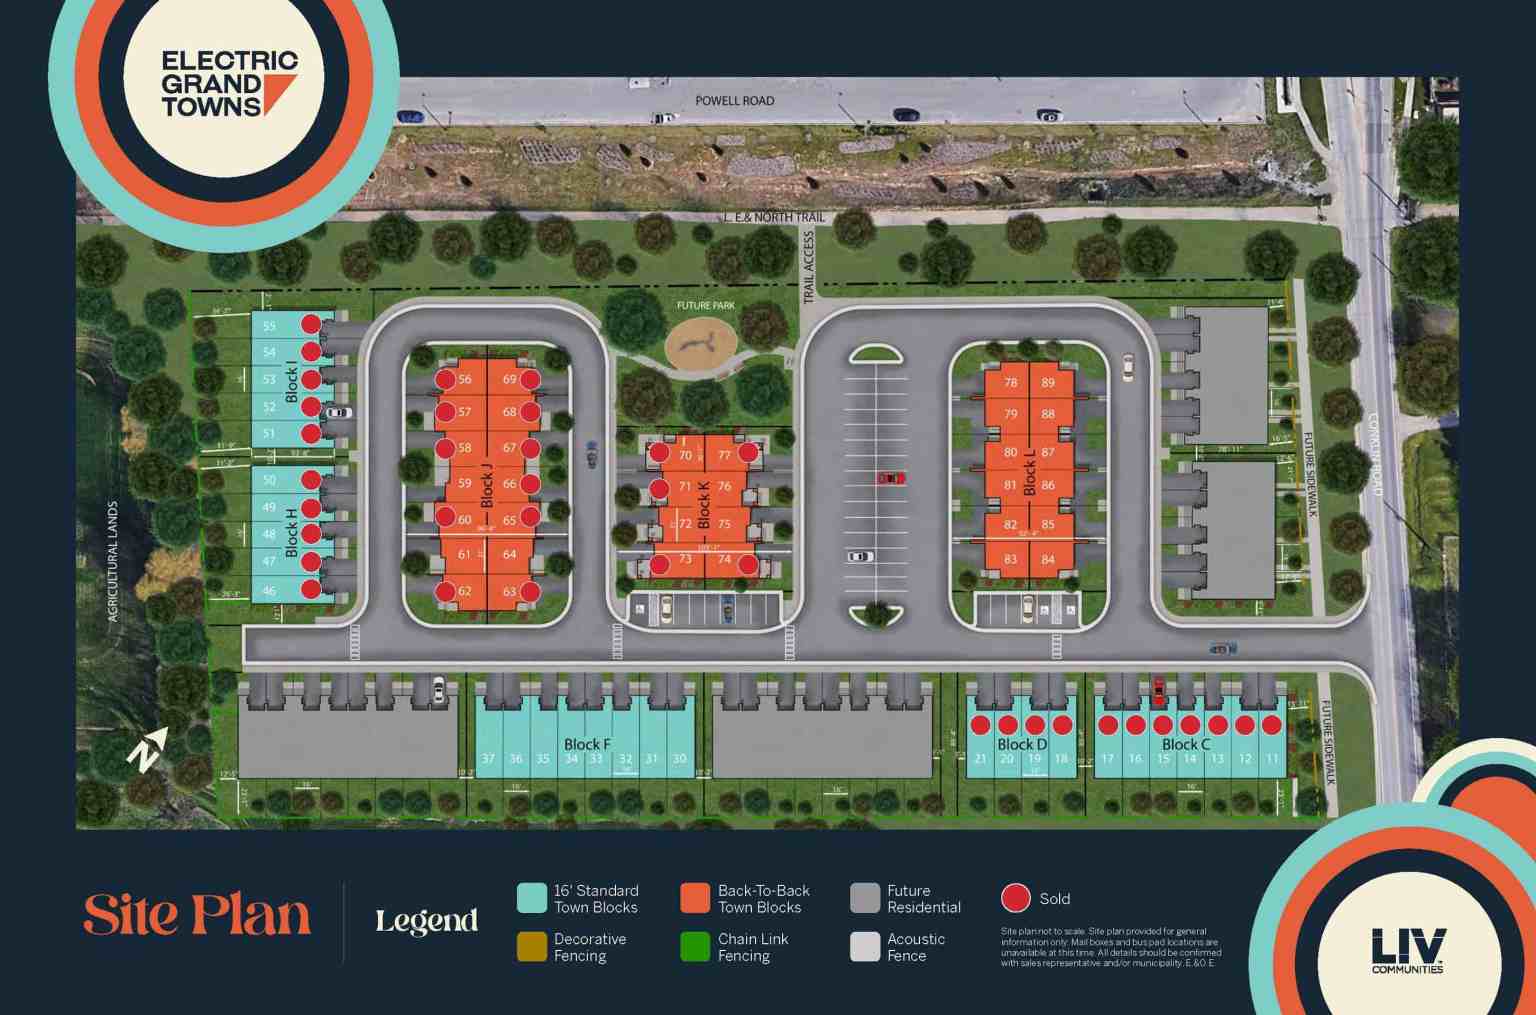 Electric Grand Towns site plan